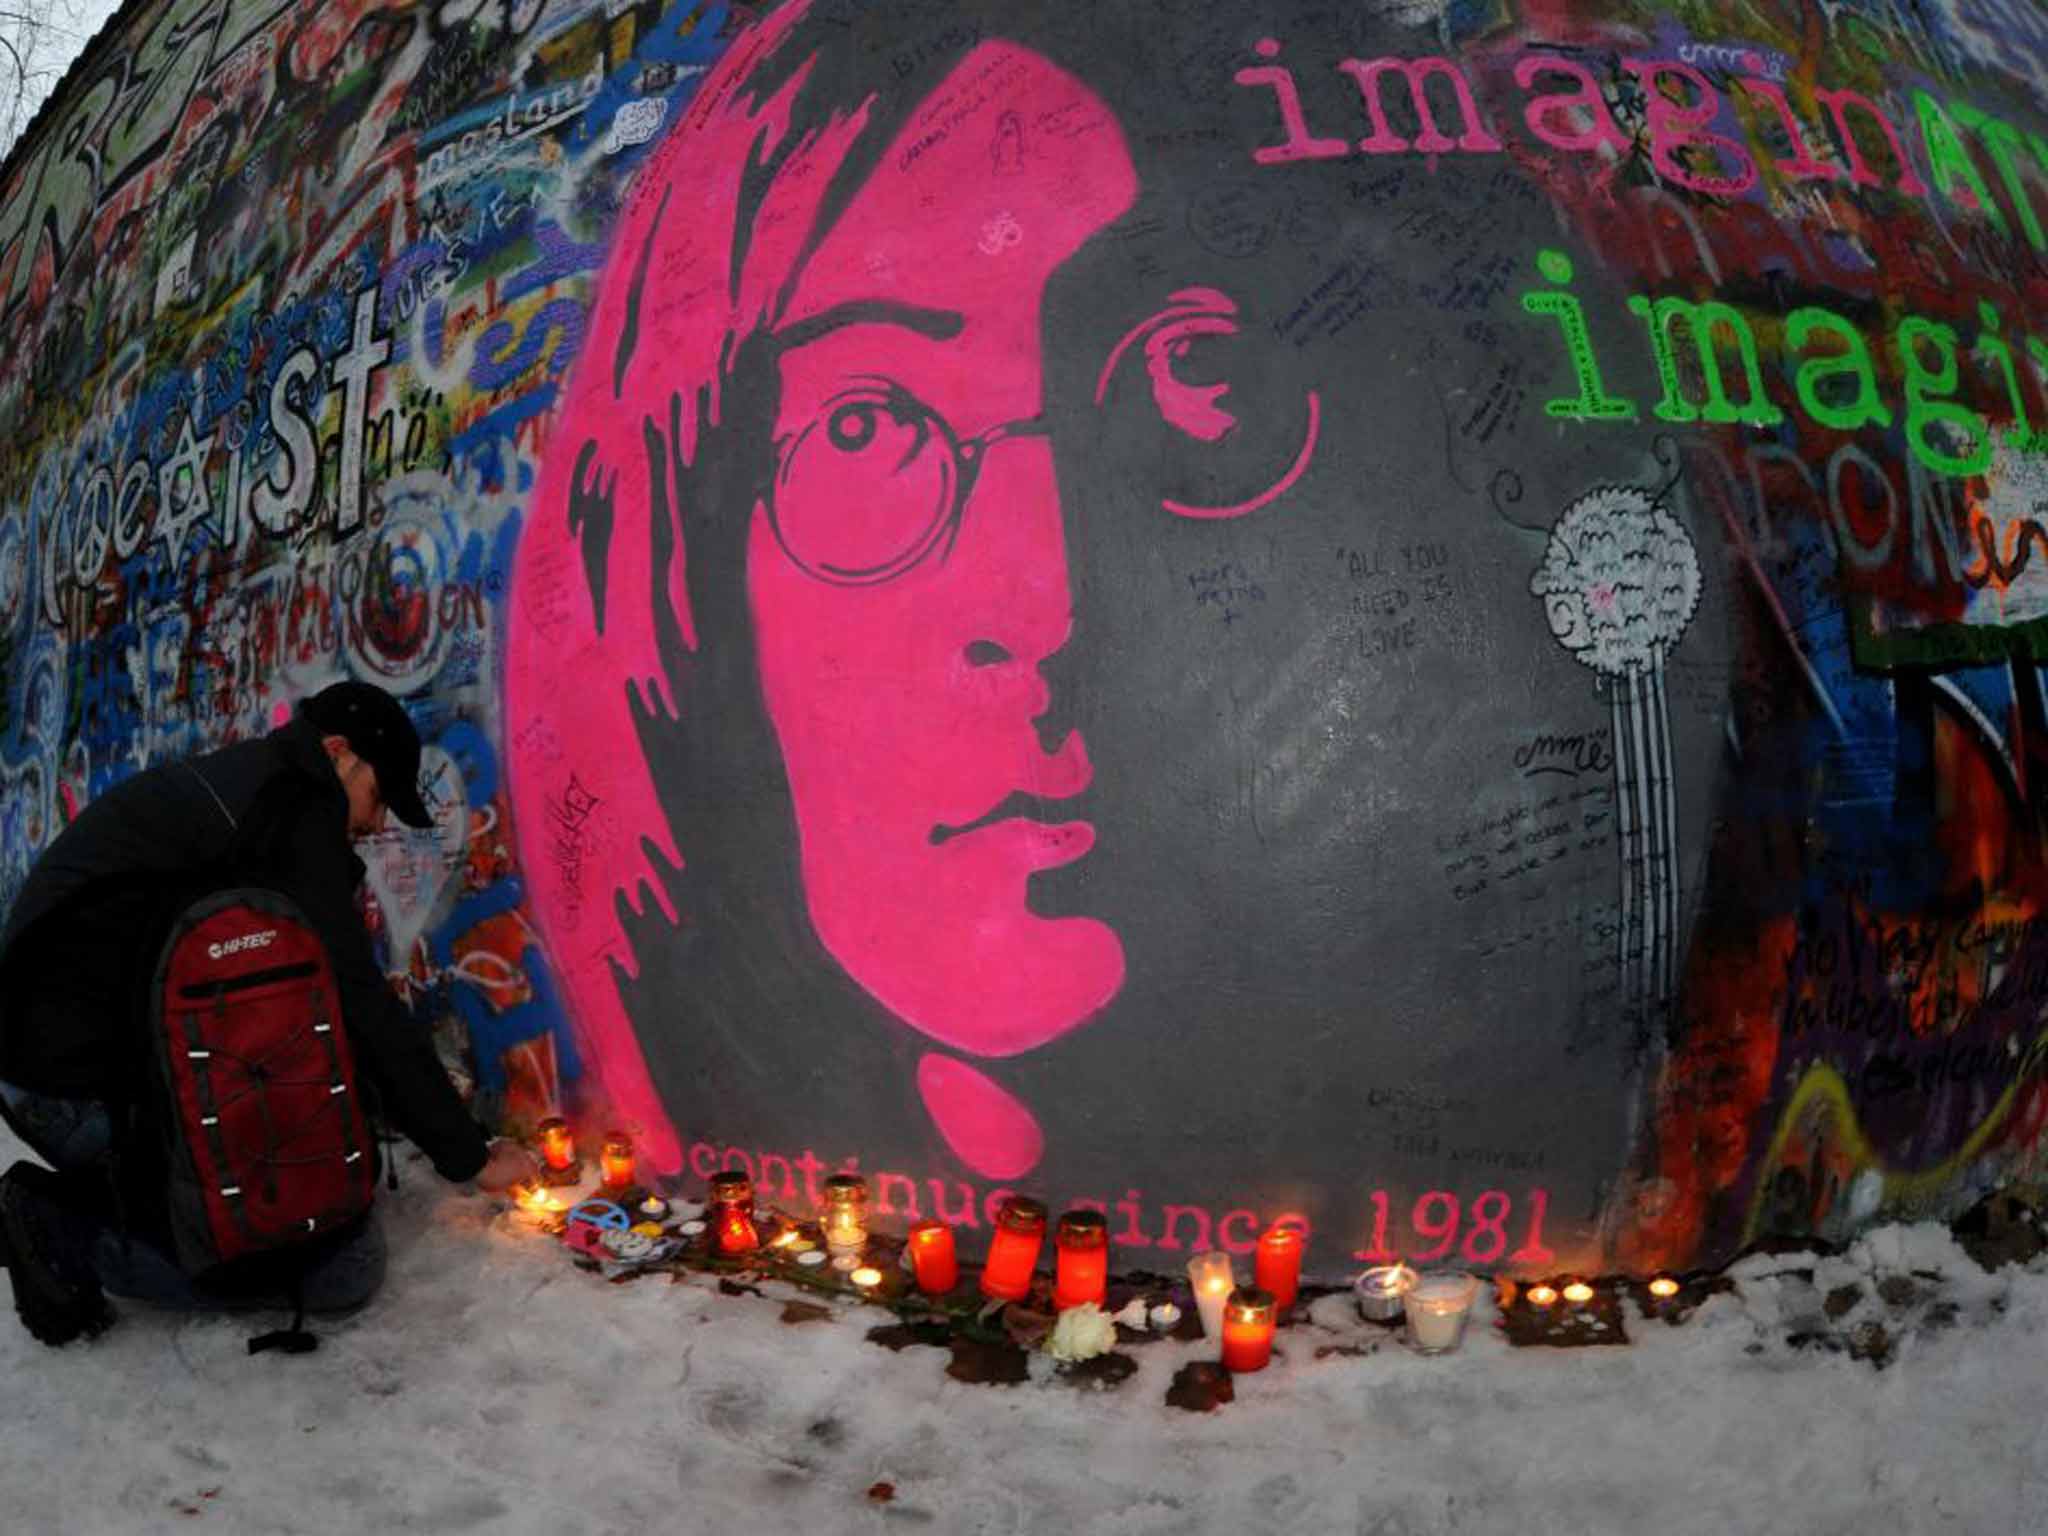 The Lennon Wall in Prague has now been painted over